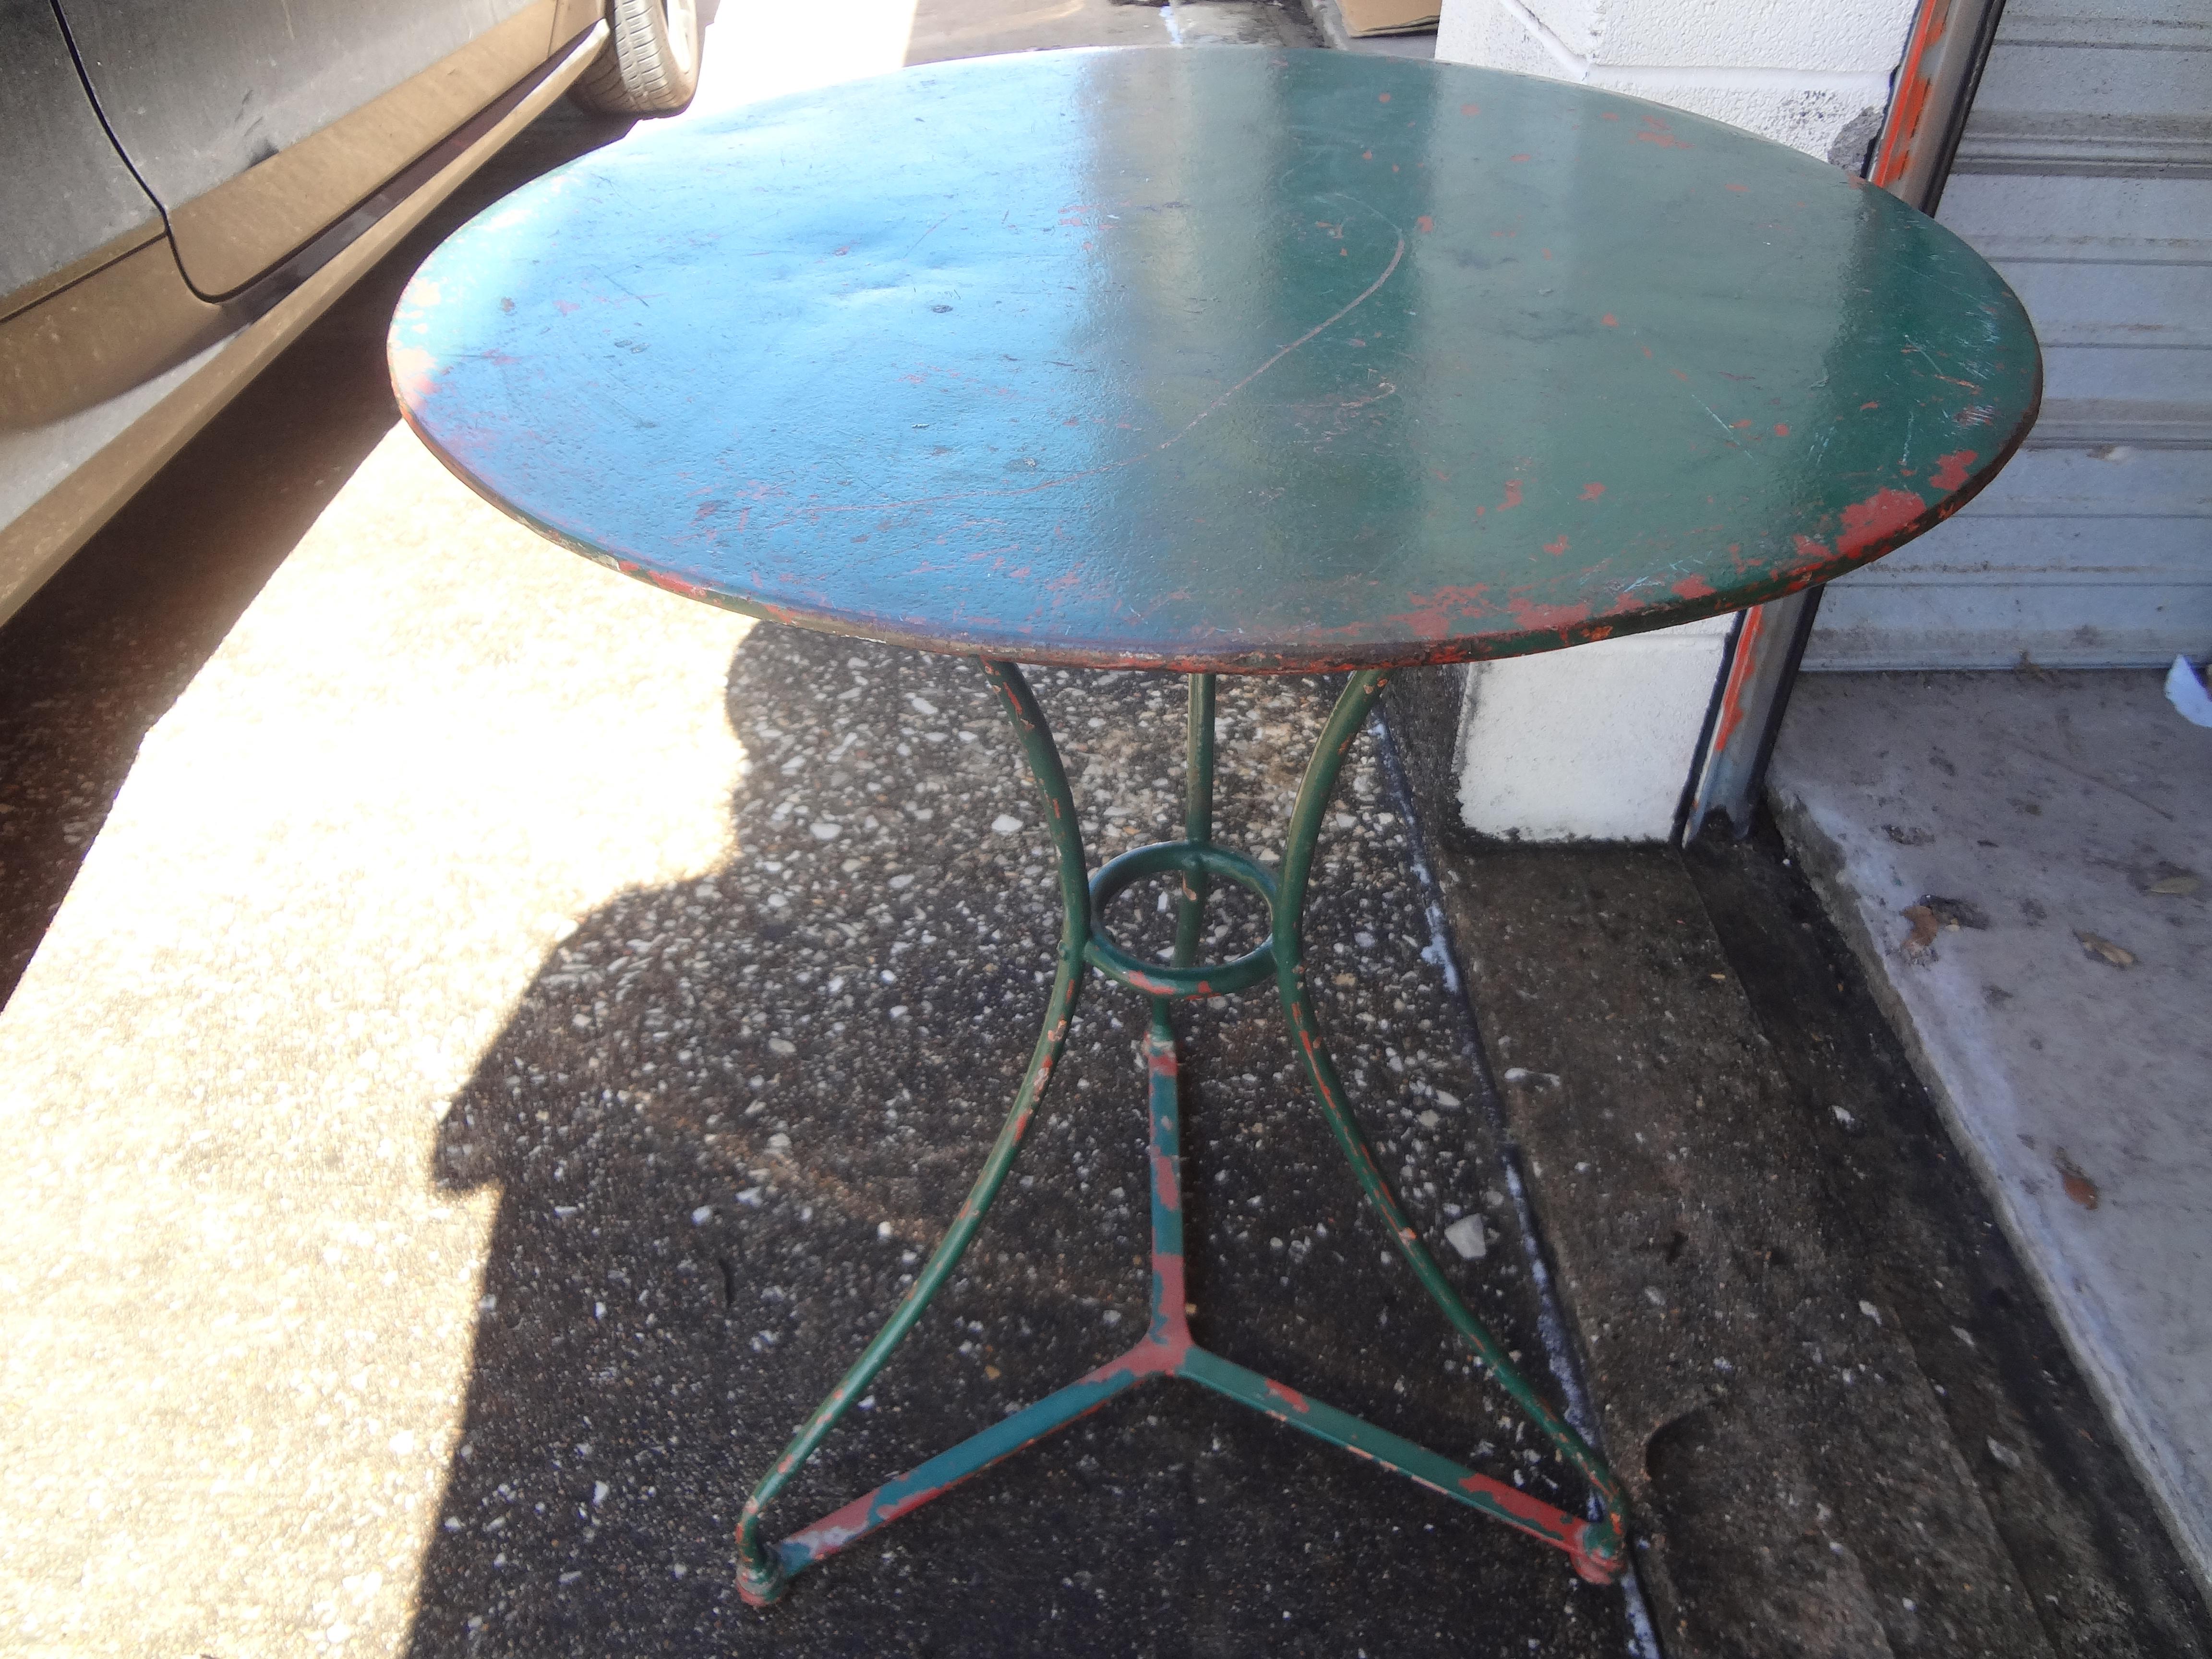 Great round antique French wrought iron bistro table, cafe table or garden table. This French iron table is a lovely shade of green with previous paint showing through. Our versatile French iron table can be used as a side table or guéridon indoors